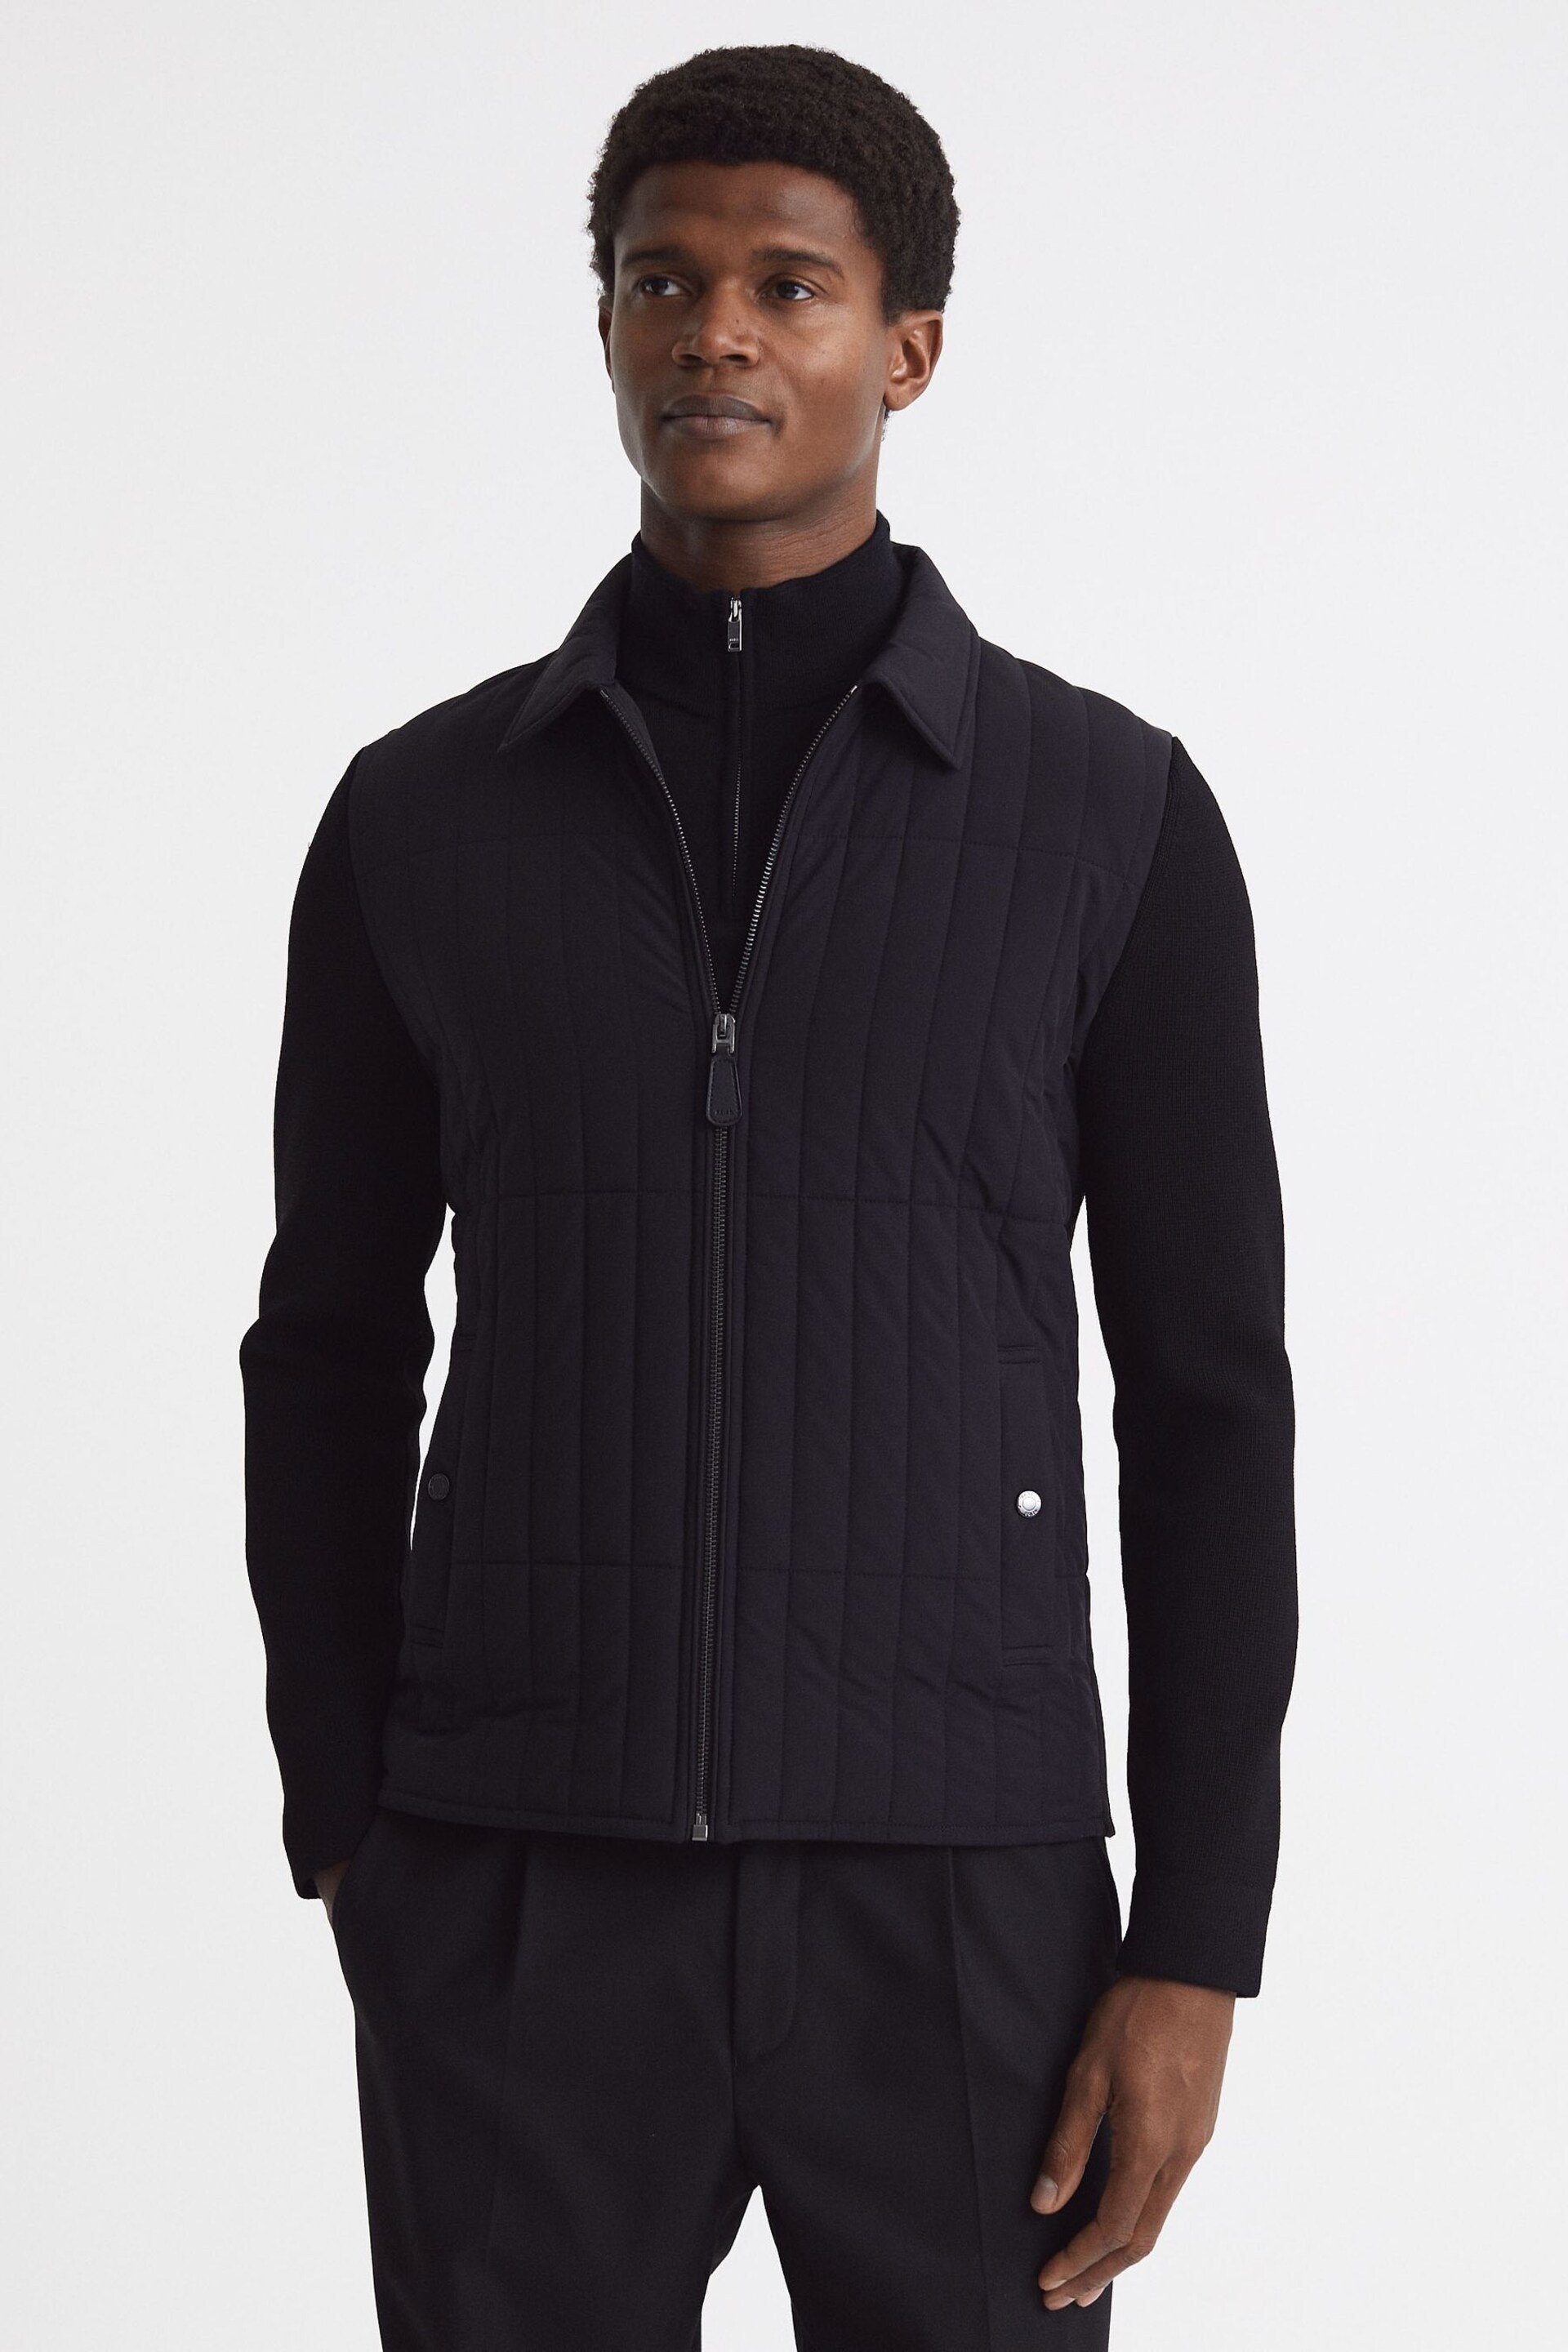 Reiss Black Tosca Hybrid Knit and Quilt Jacket - Image 1 of 5